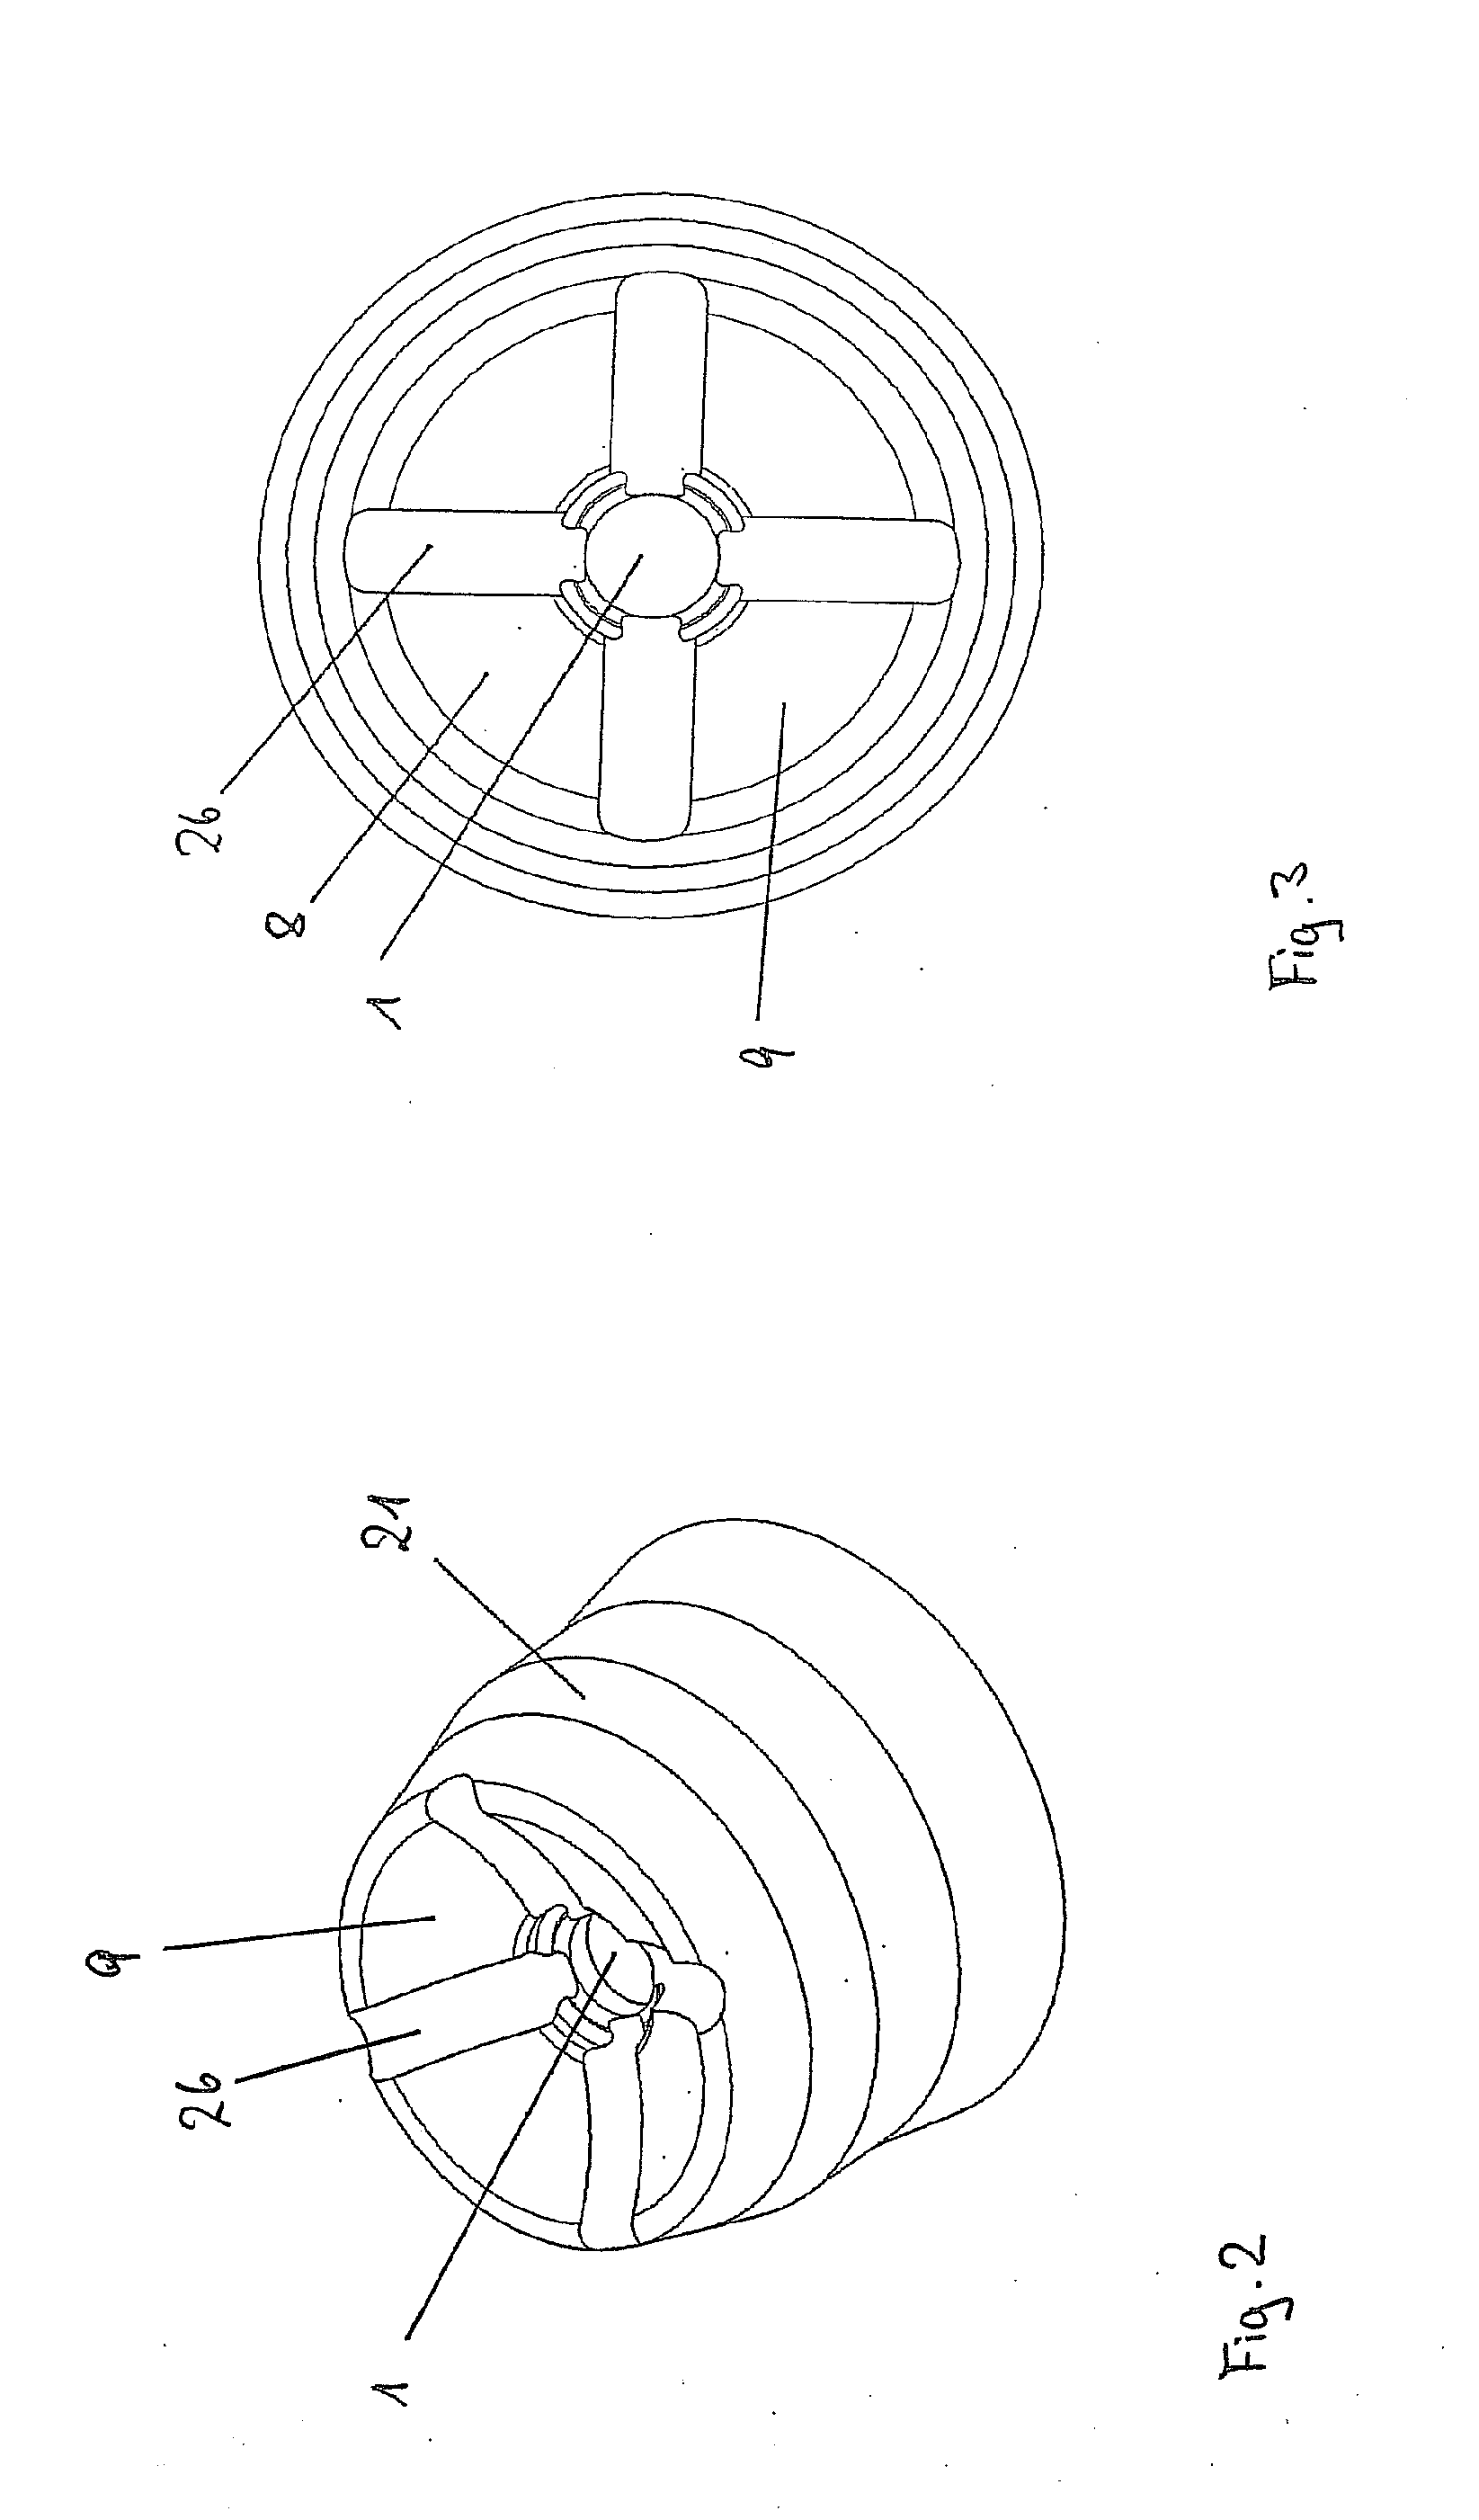 Pretensioning Device for a Safety Belt